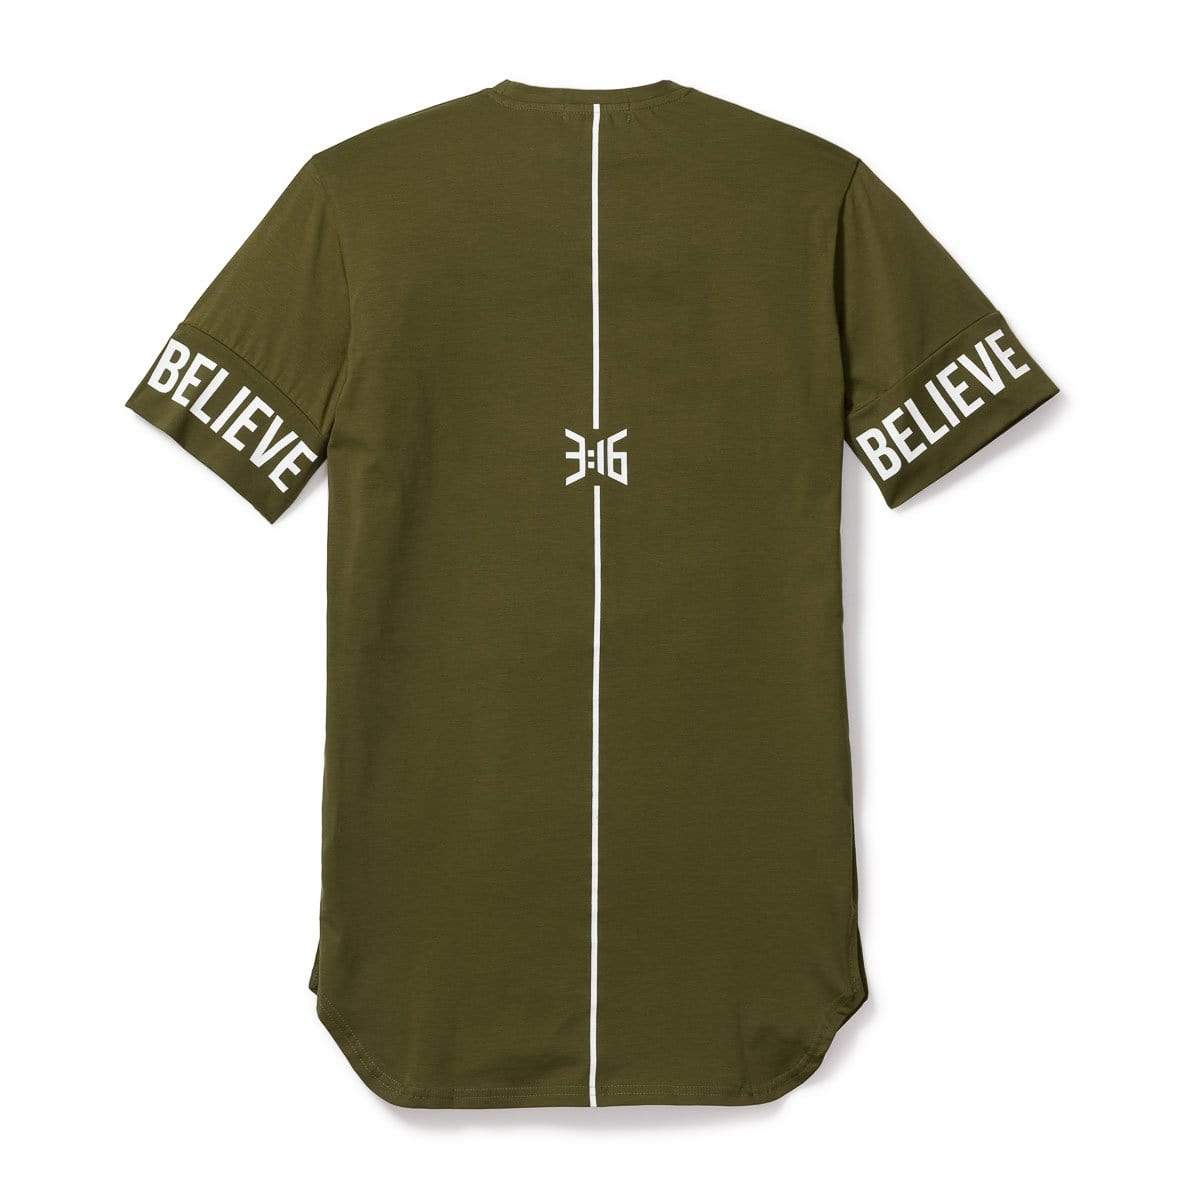 3:16 Collection T-Shirt 3:16 - Believe Sleeve Tee - Olive